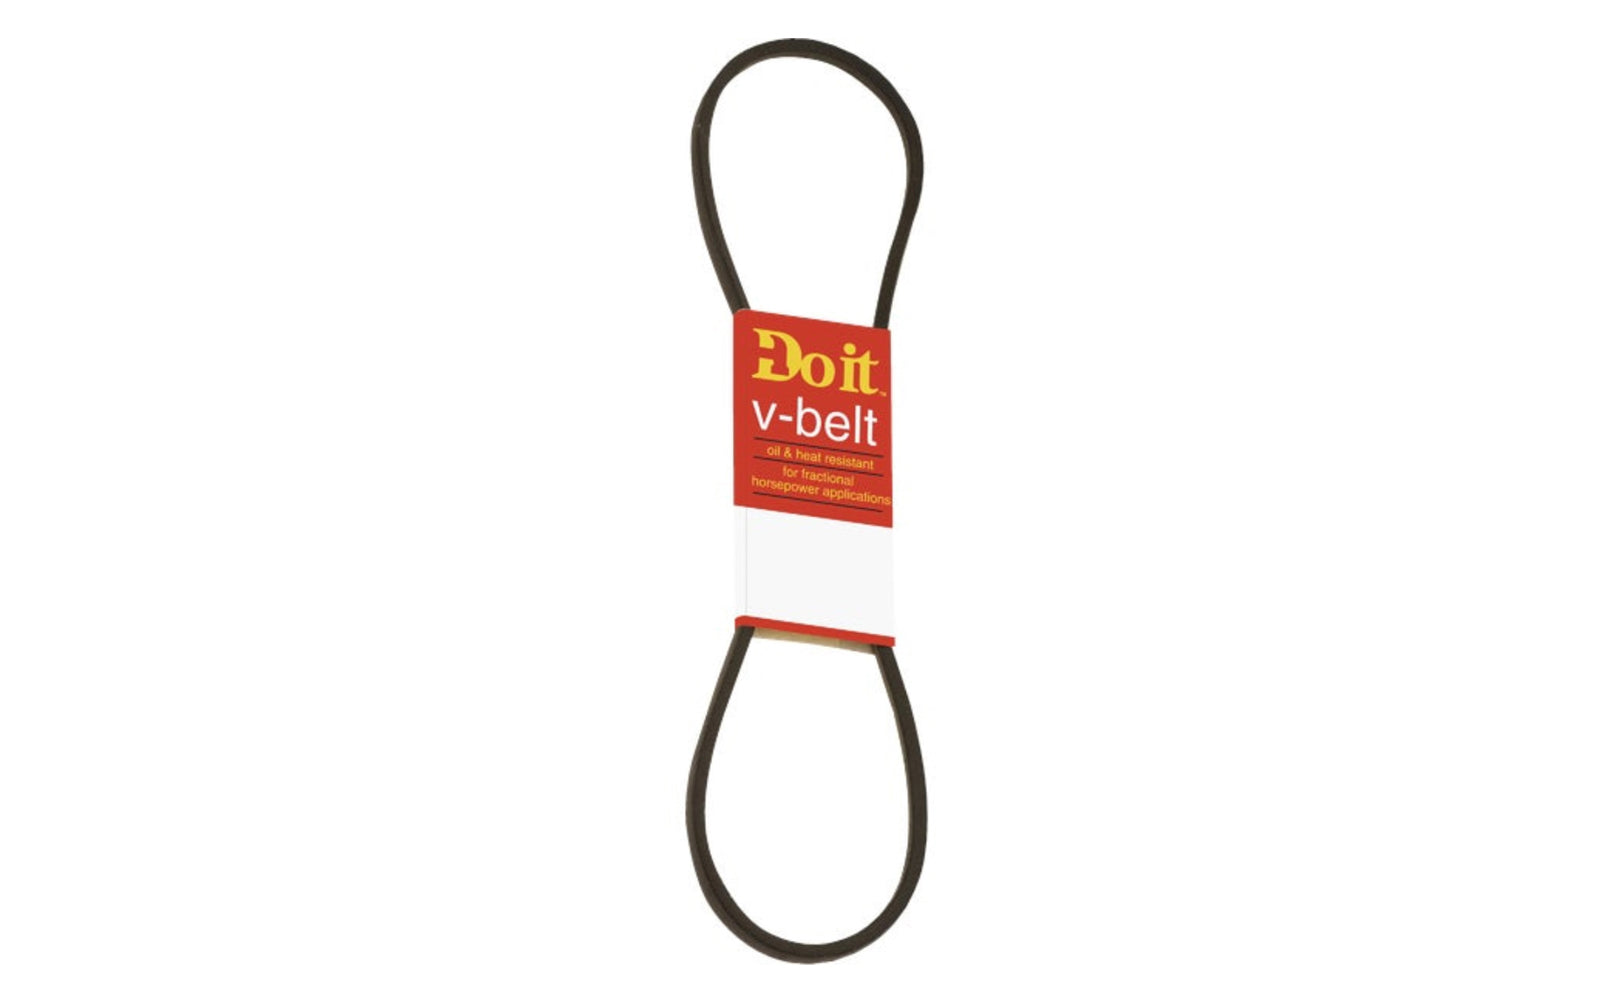 24" Long x 1/2" Width V-Belt - 4L240. Oil & heat resistant. Recommended for 1-3 HP (horsepower) light-duty applications. Typically the best option for electric powered applications. For refrigerators, washing machines, pumps, stokers, woodworking machines. Pulley type: A-Pulley.